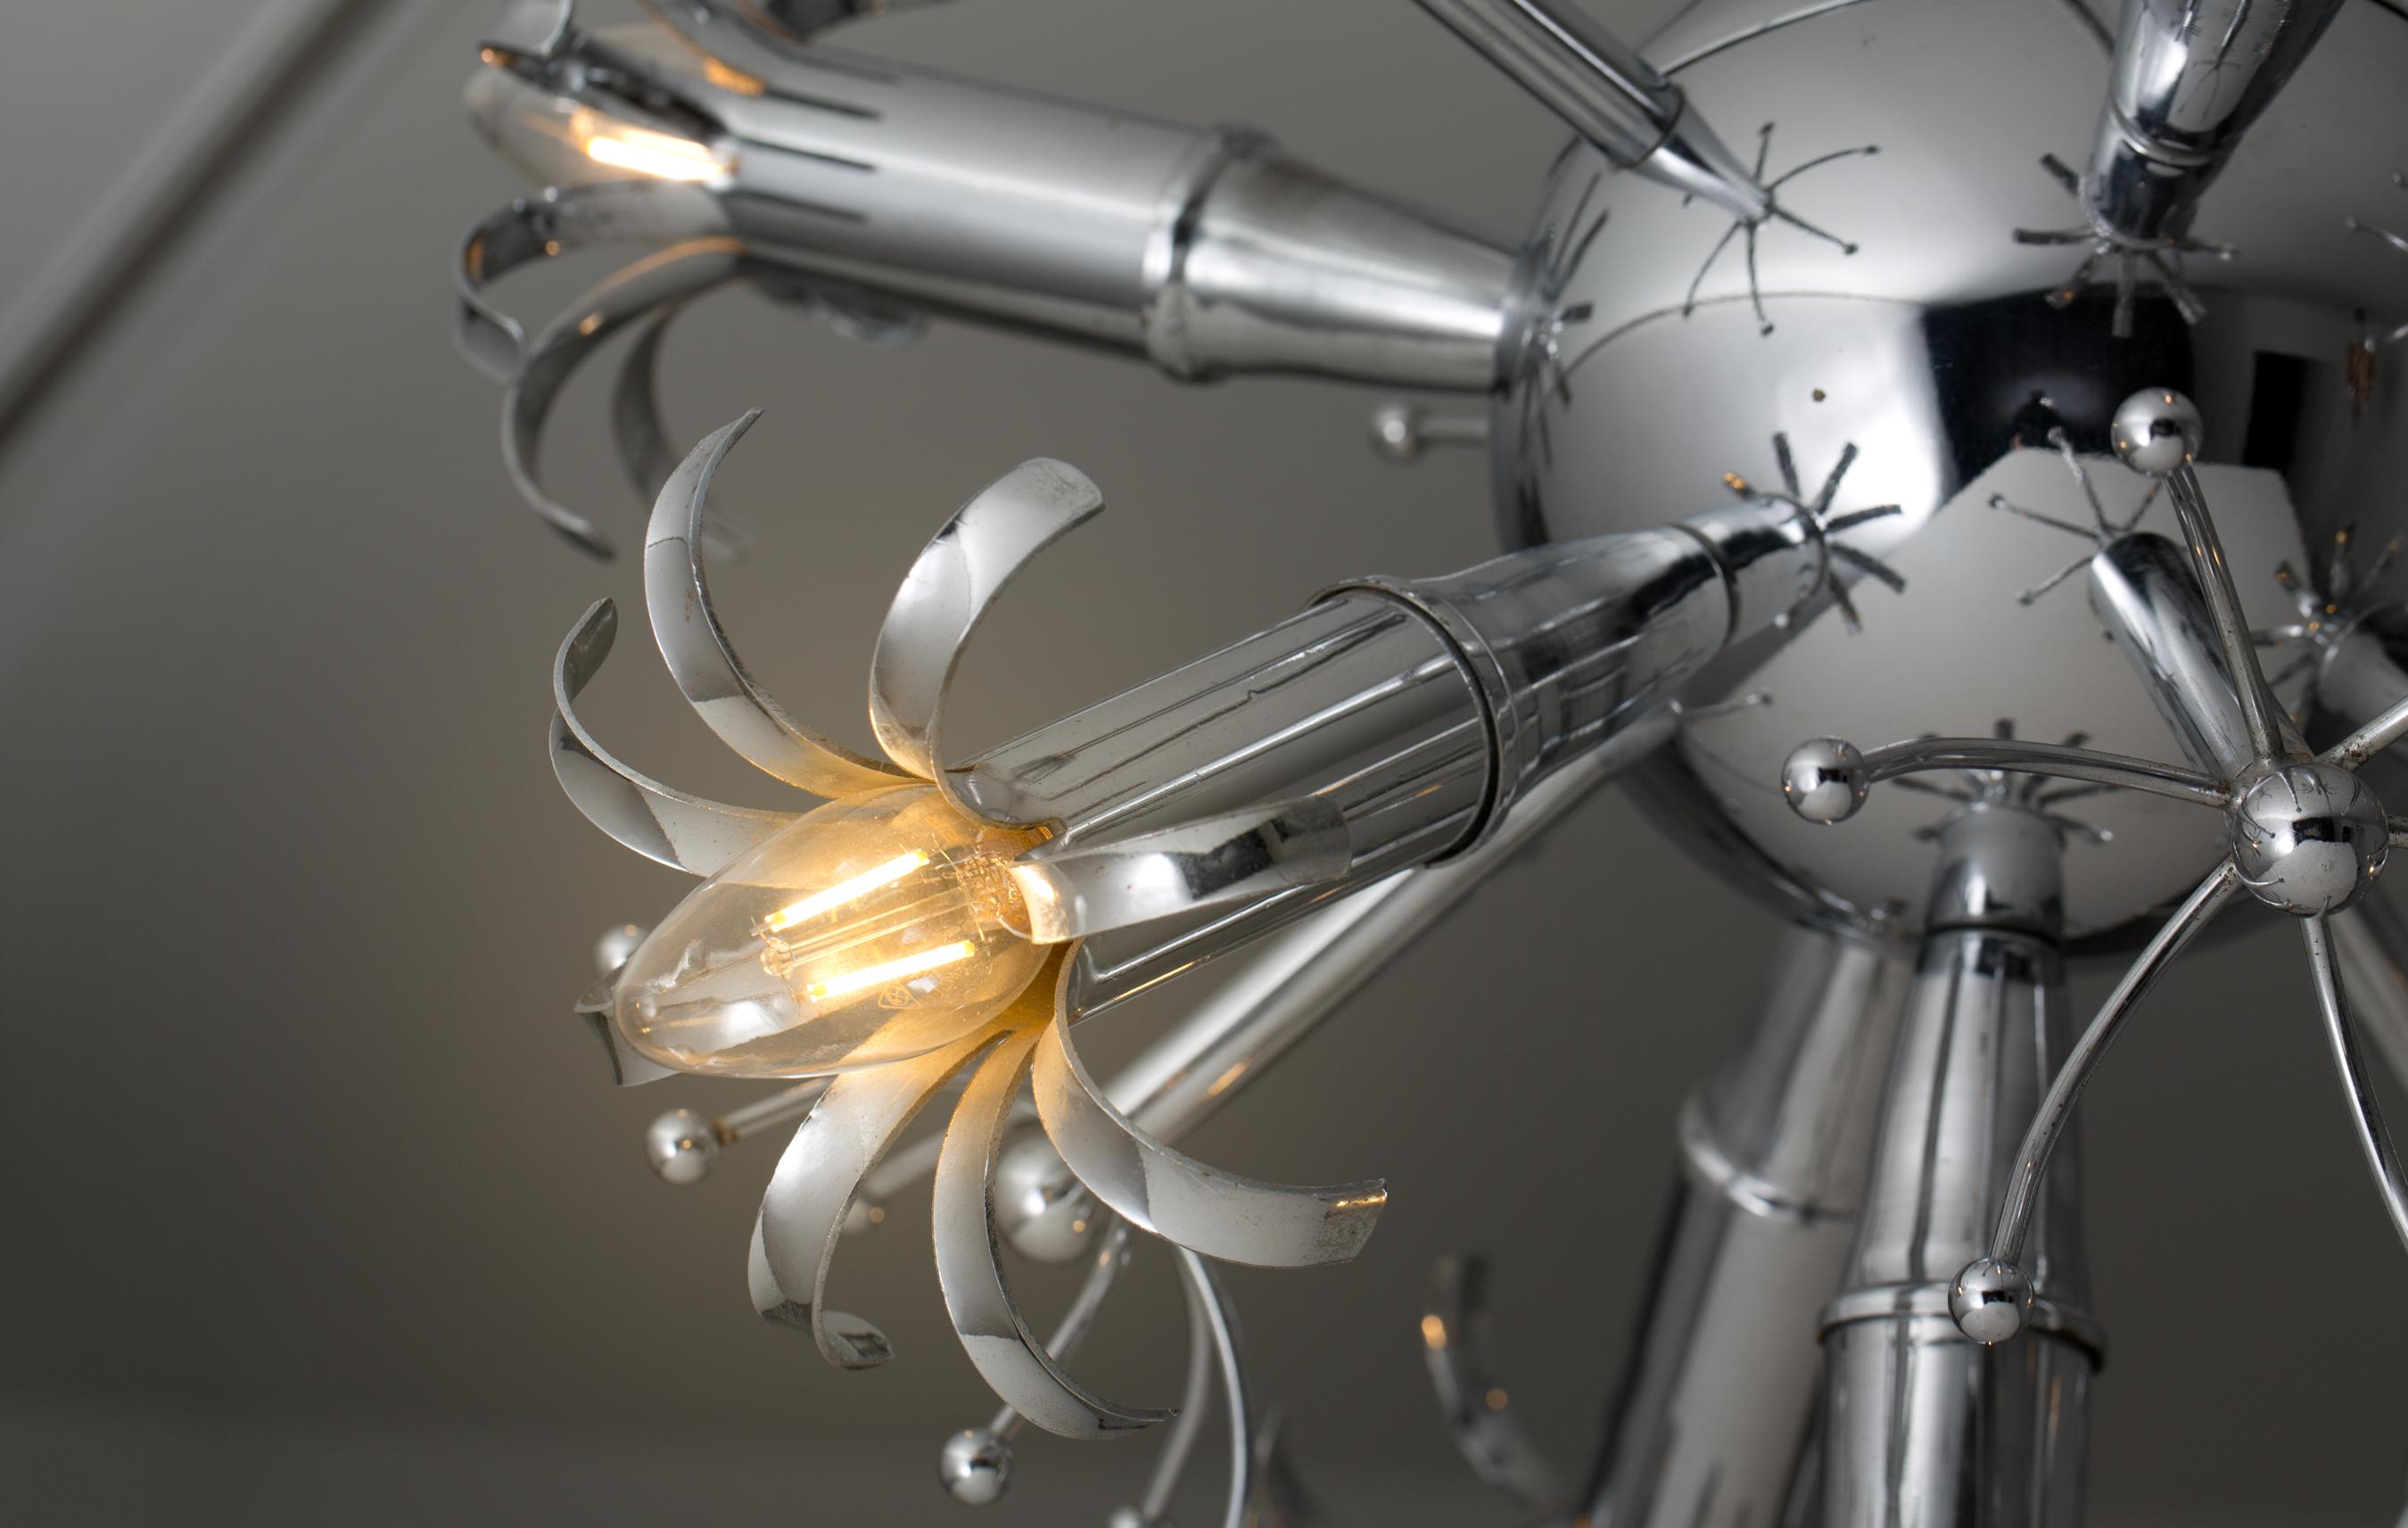 This futurism Italian midcentury design chandelier was produced during the 1950s. The chandelier is made from nickel-plated metal and has six arms with light bulbs at the end. The midcentury design light has a metal ball as a base. The light bulbs